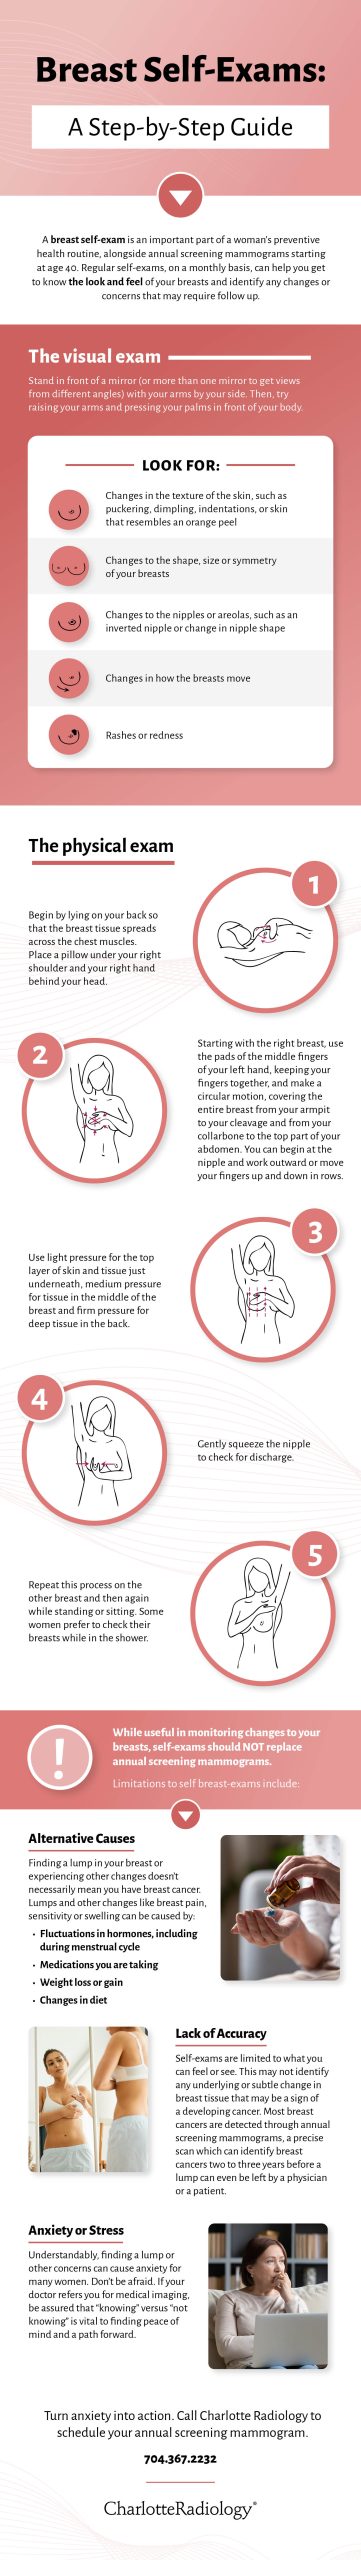 Infographic explaining the steps of a breast self-exam